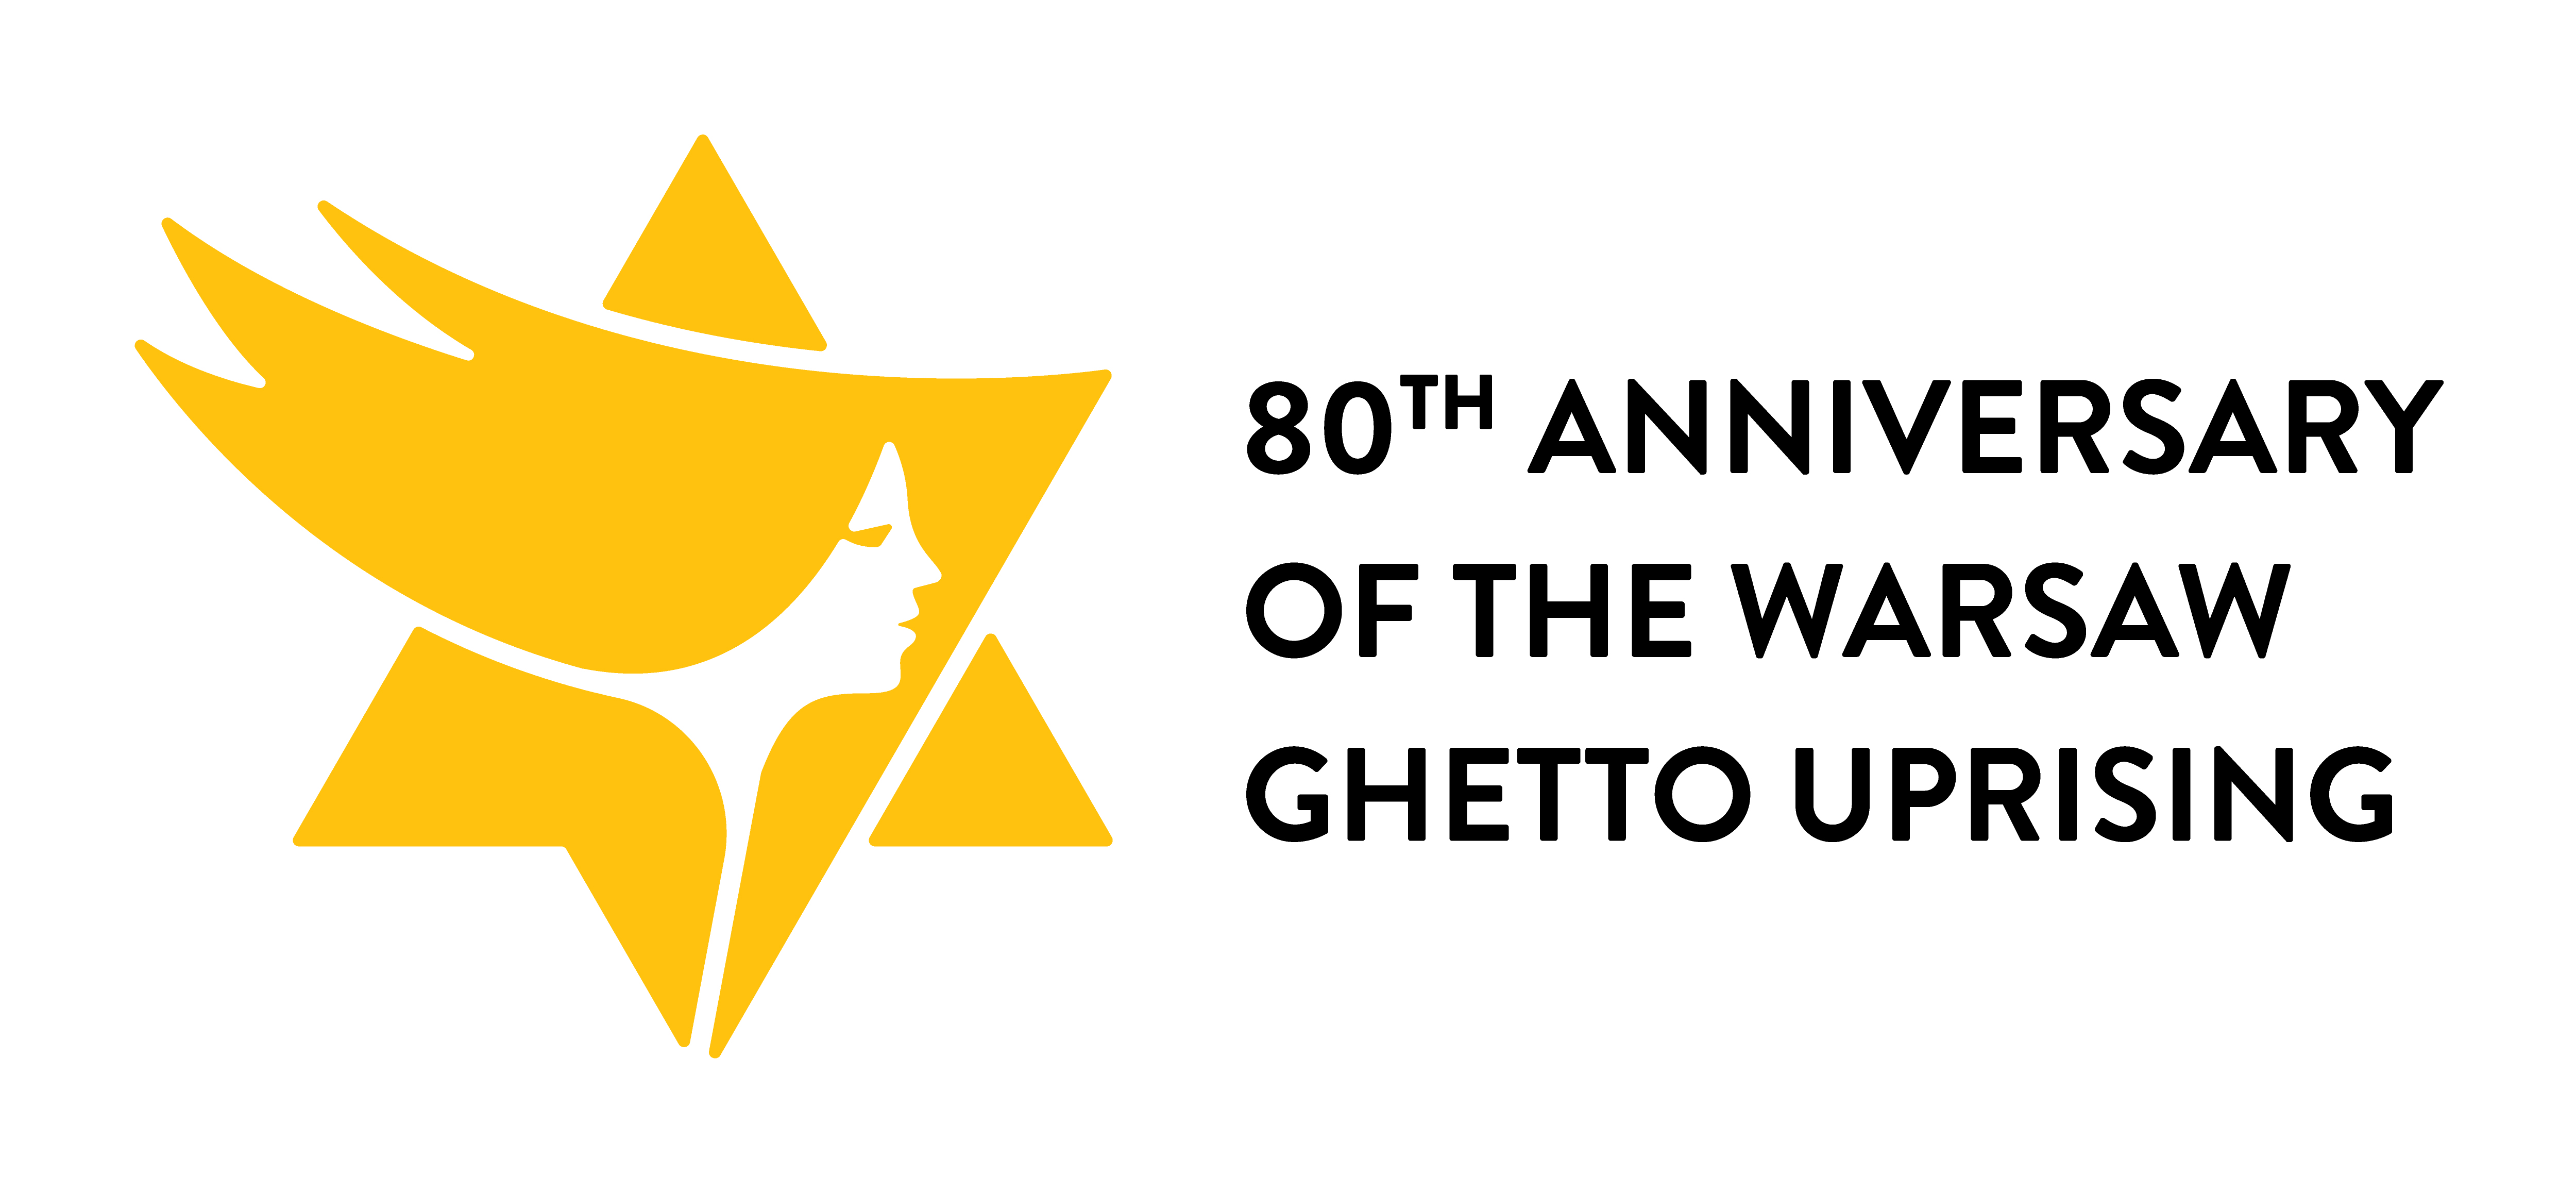 Logos of 80th anniversary of the outbreak of Warsaw Ghetto Uprising